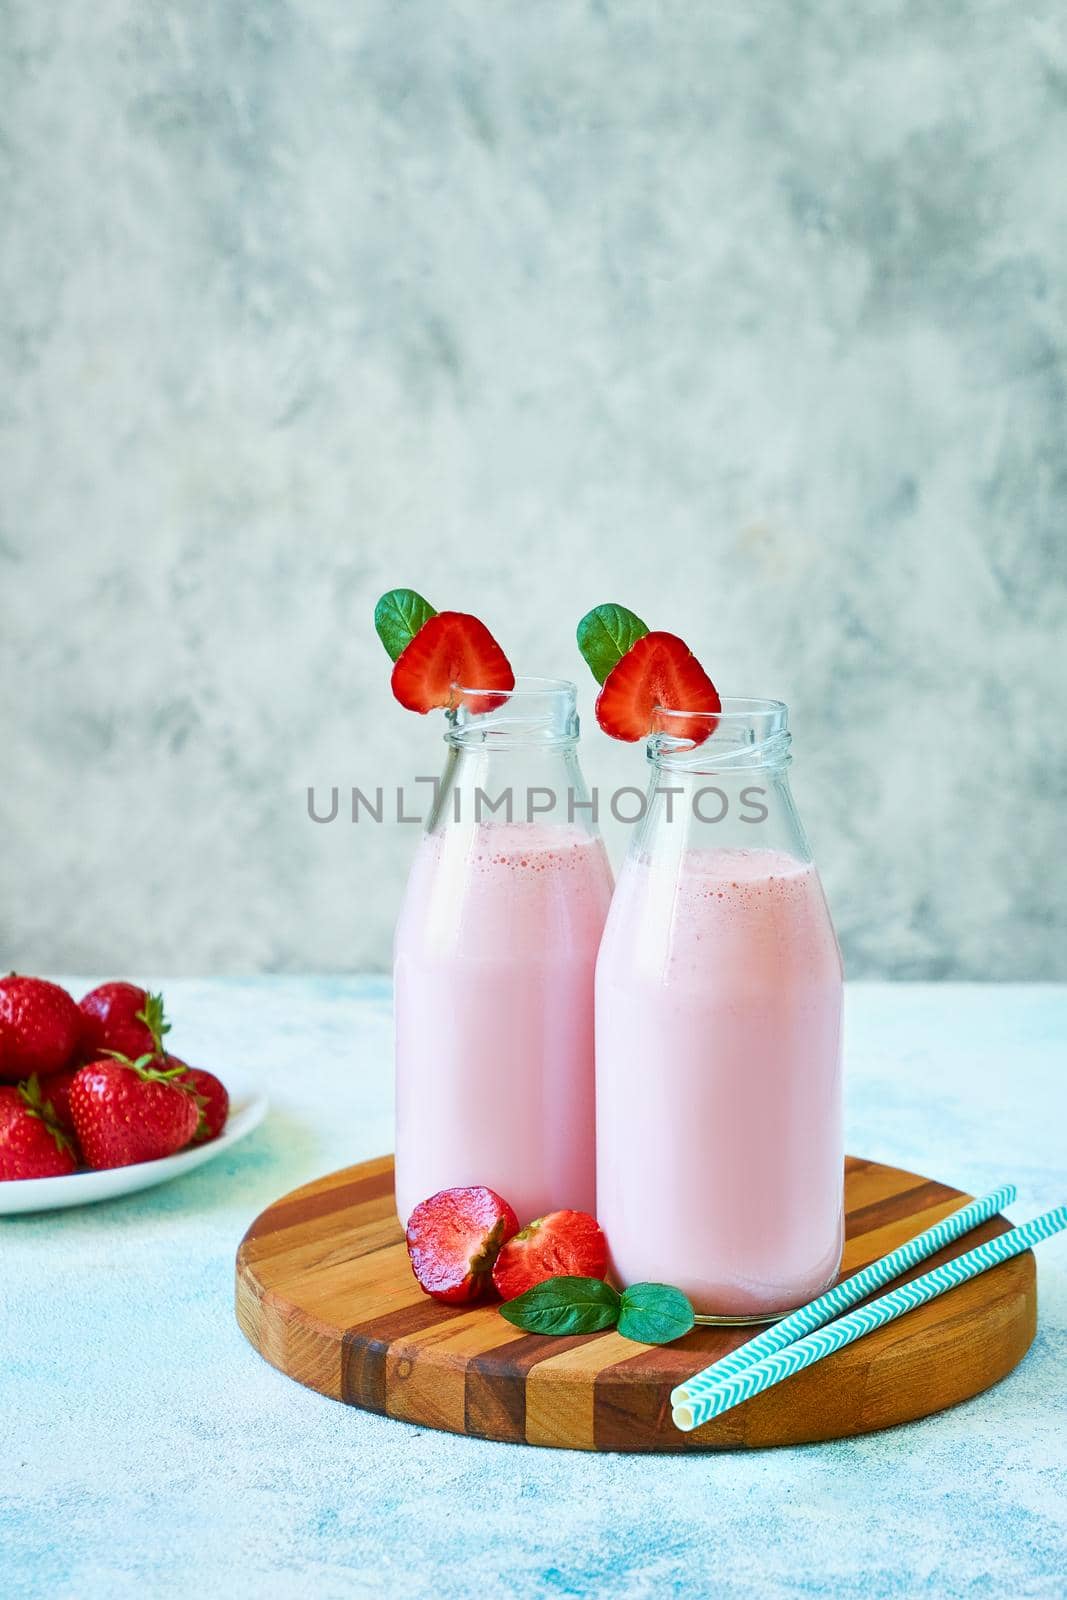 Strawberry smoothie or milkshake in glass jar with berries on wooden board on blue concrete background. Healthy summer drink